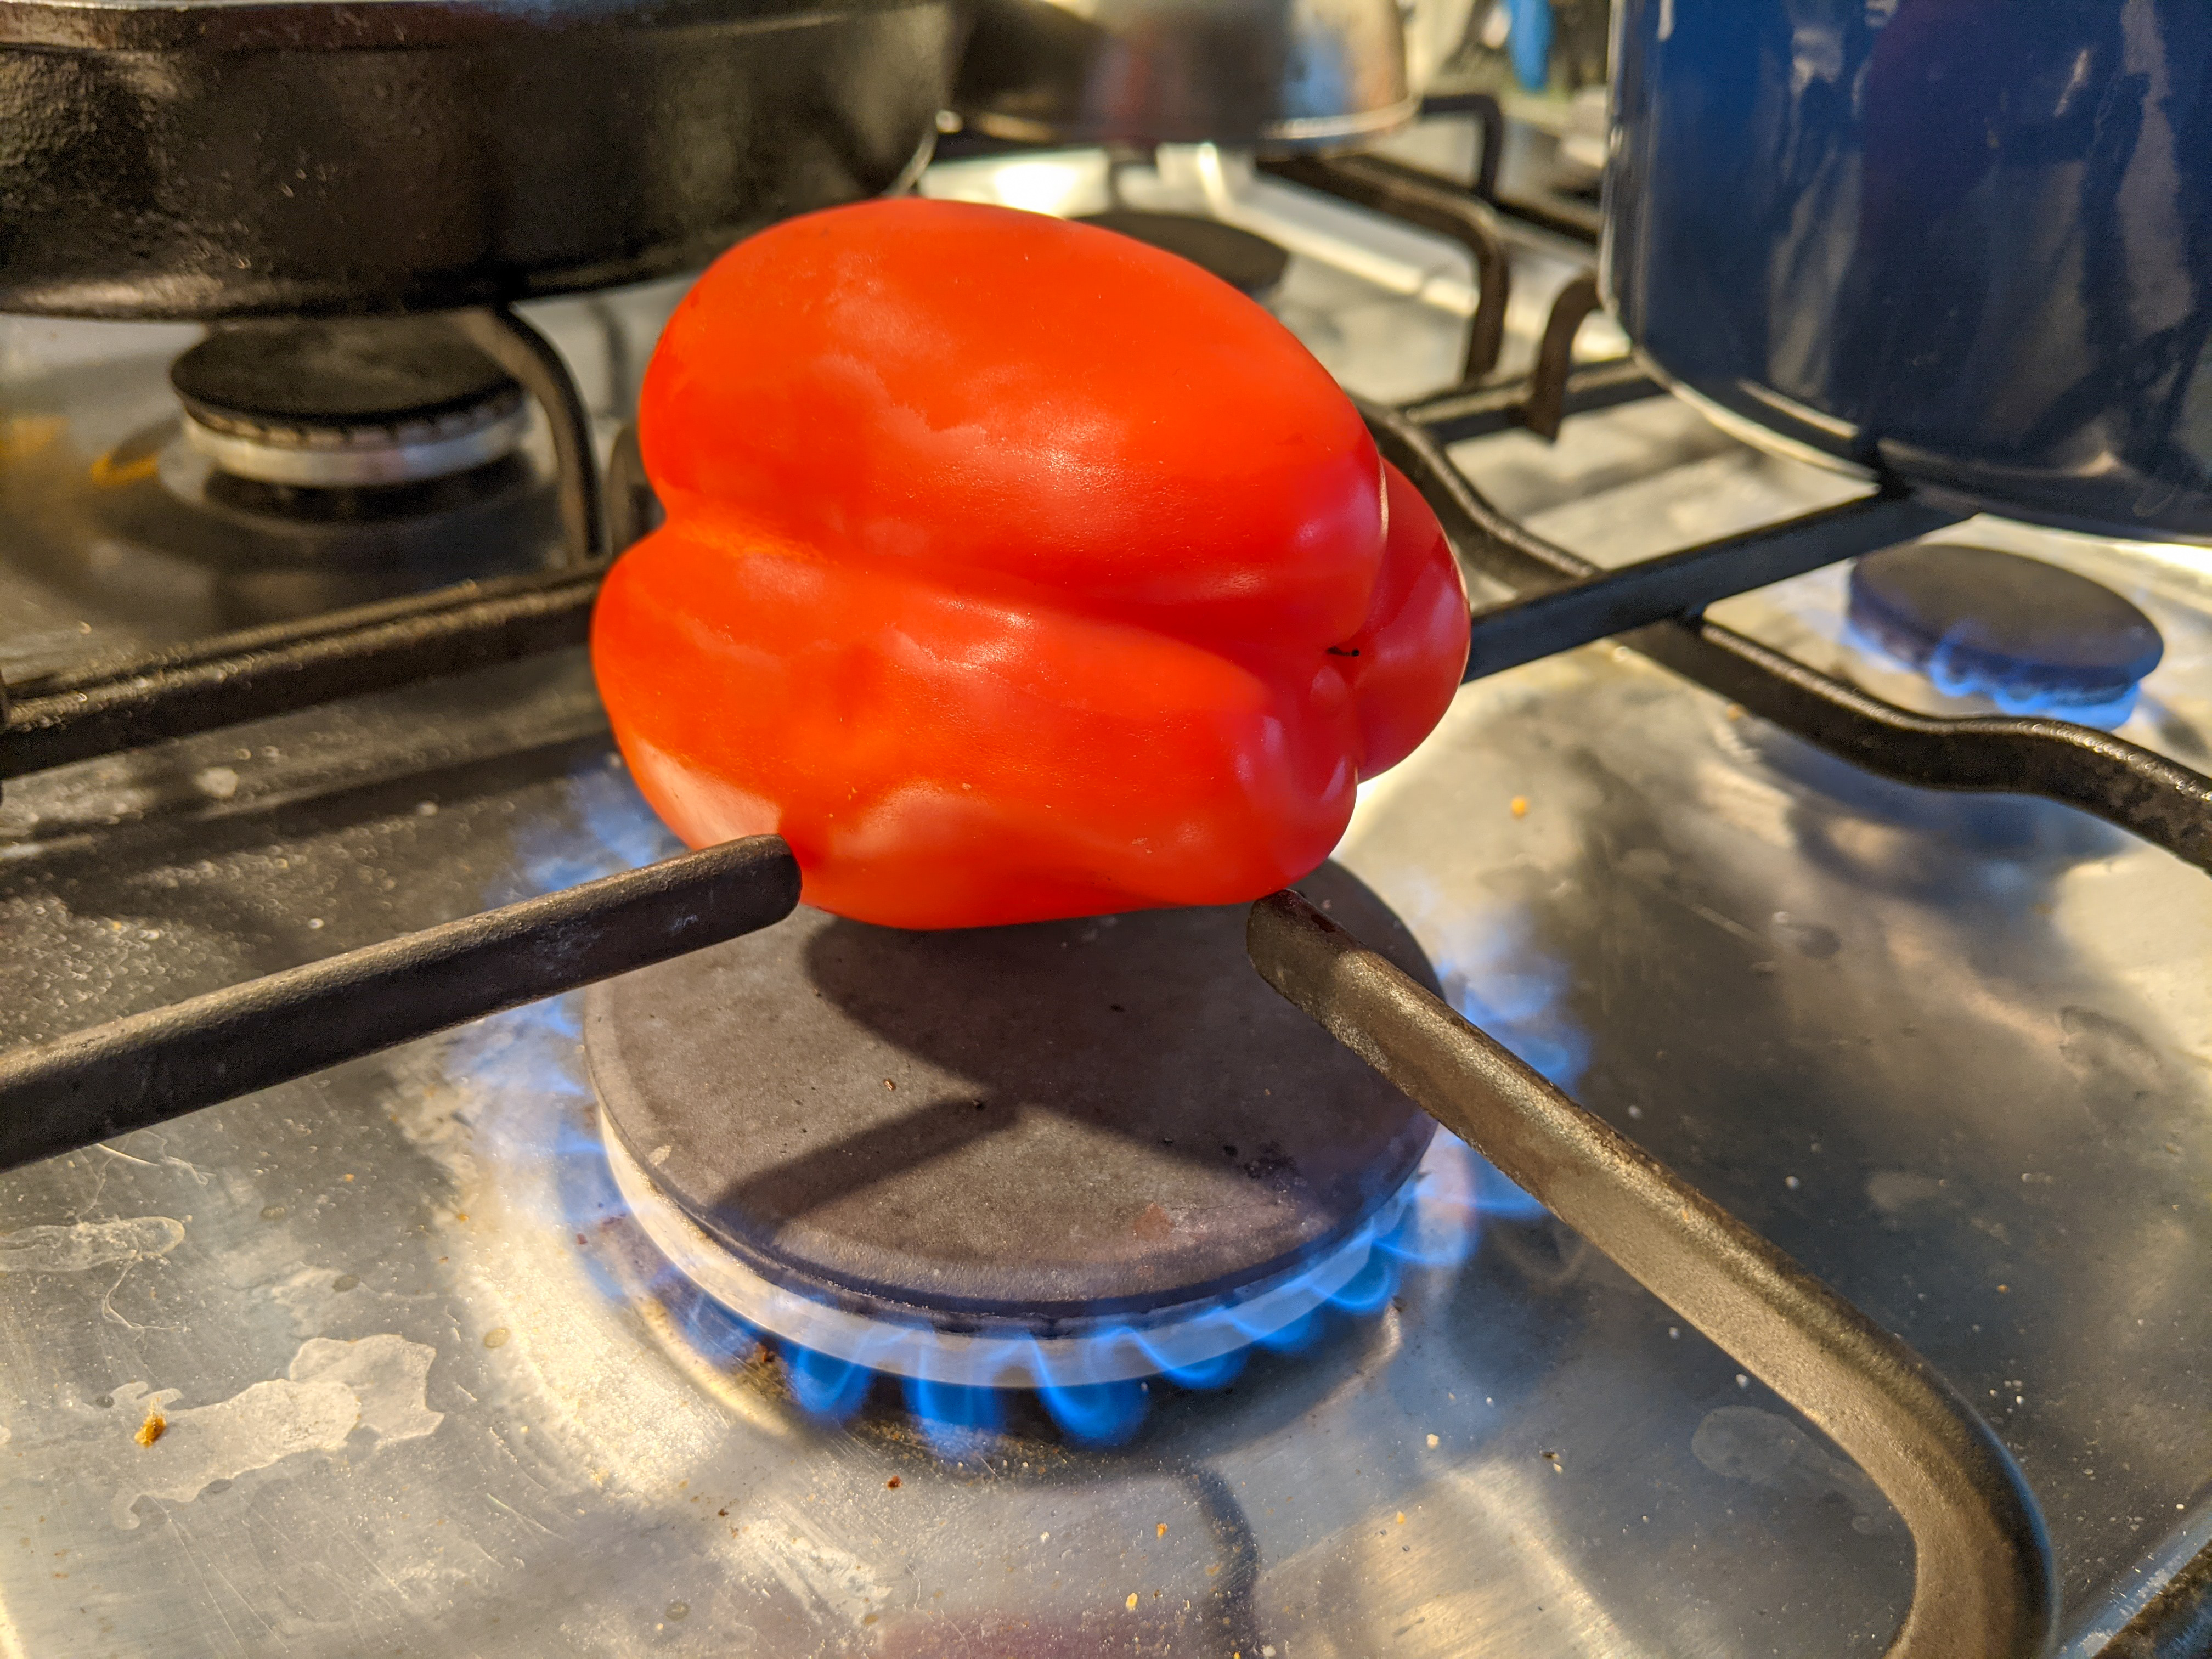 A red pepper sitting on the lit burner of a gas stove